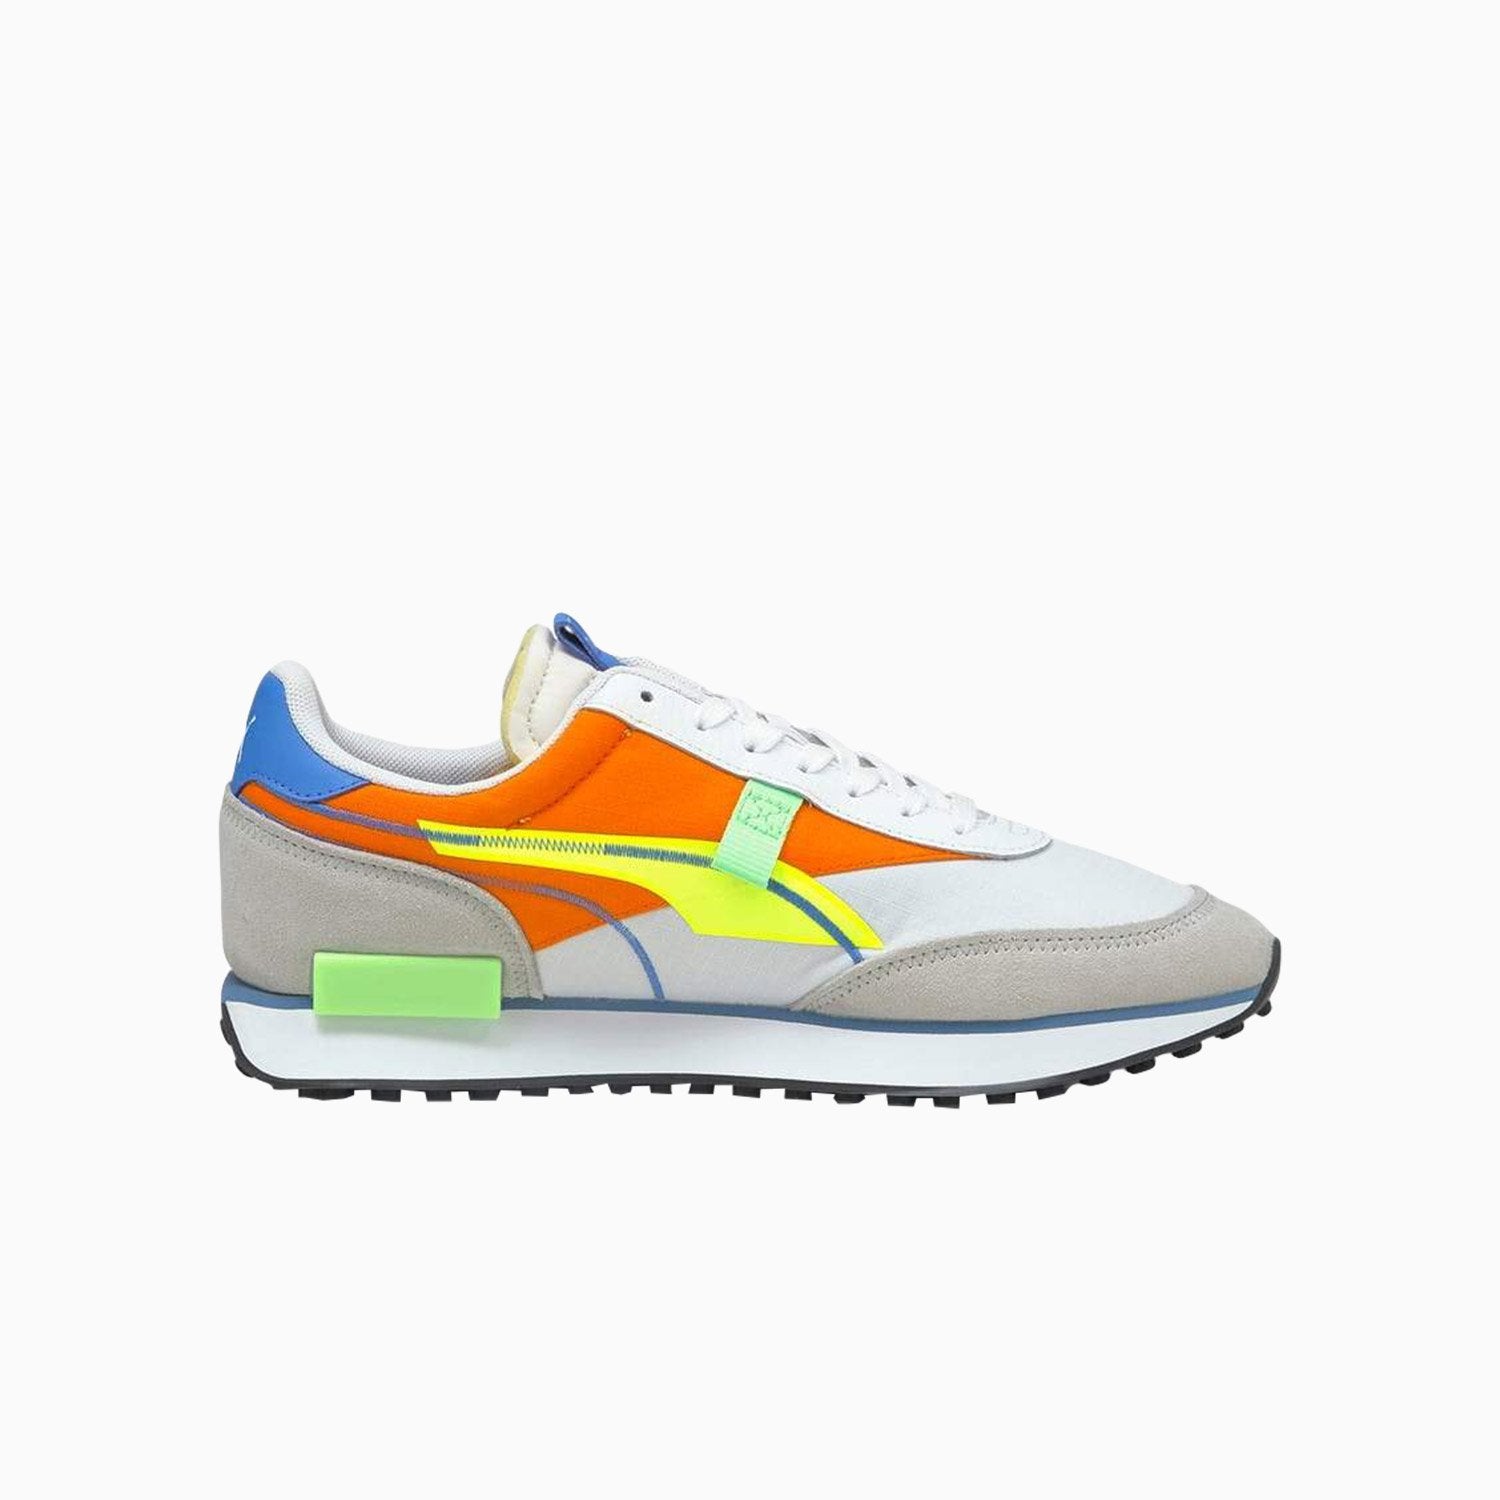 Puma | Men's Future Rider Twofold SD Pop - Color: WHITE ORANGE GREY BLUE - Tops and Bottoms USA -